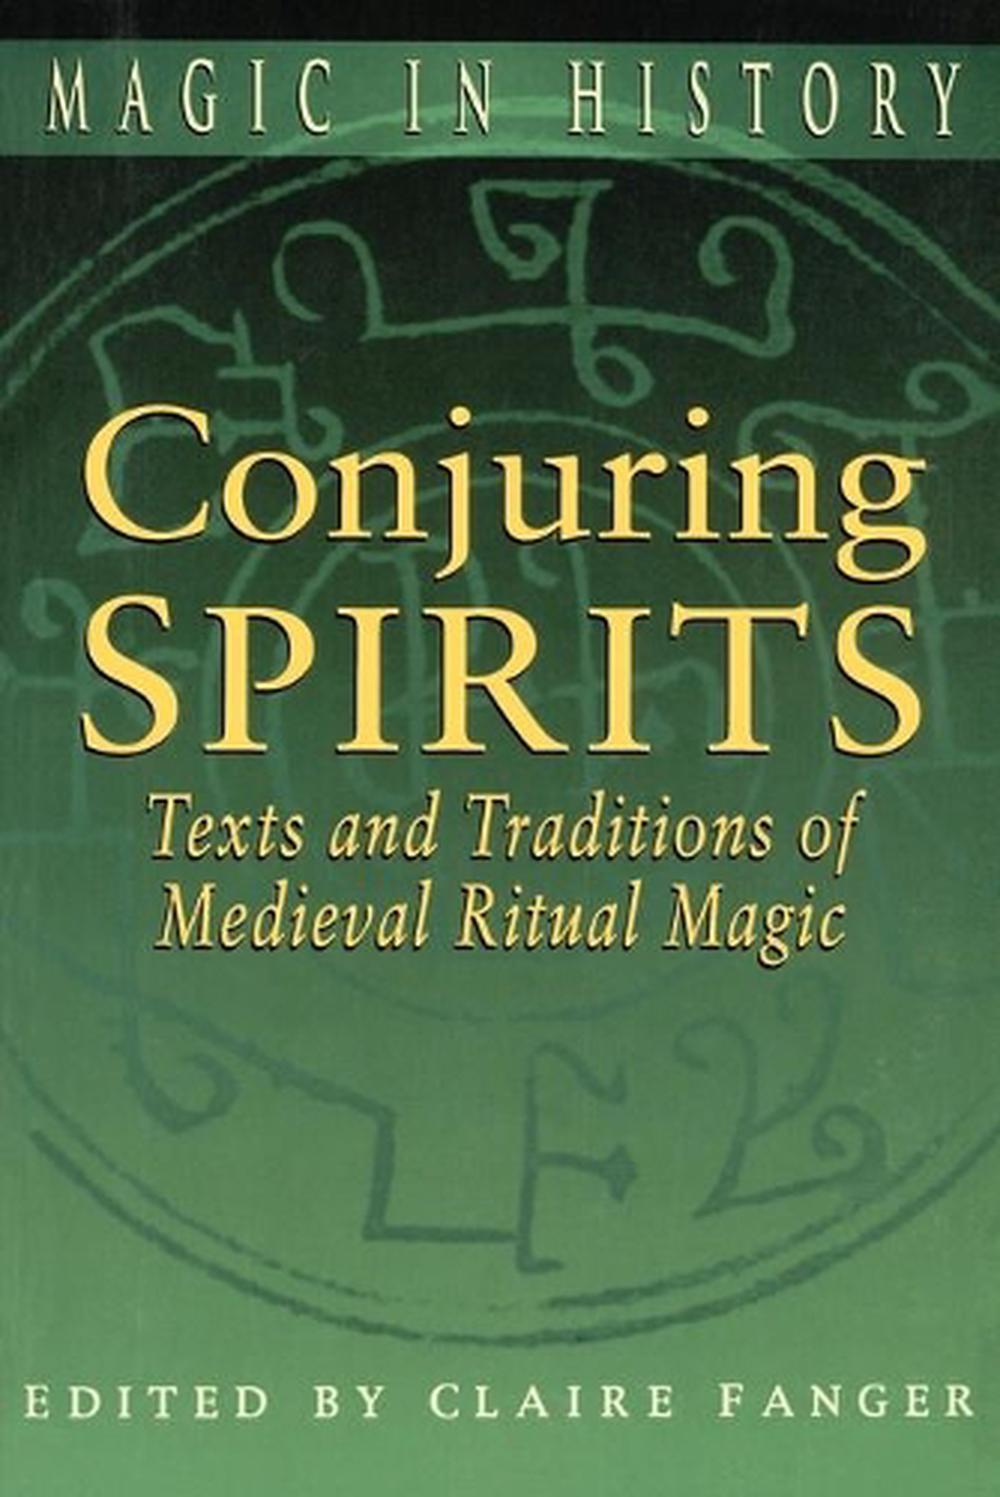 Conjuring Spirits Texts and Traditions of Medieval Ritual Magic by